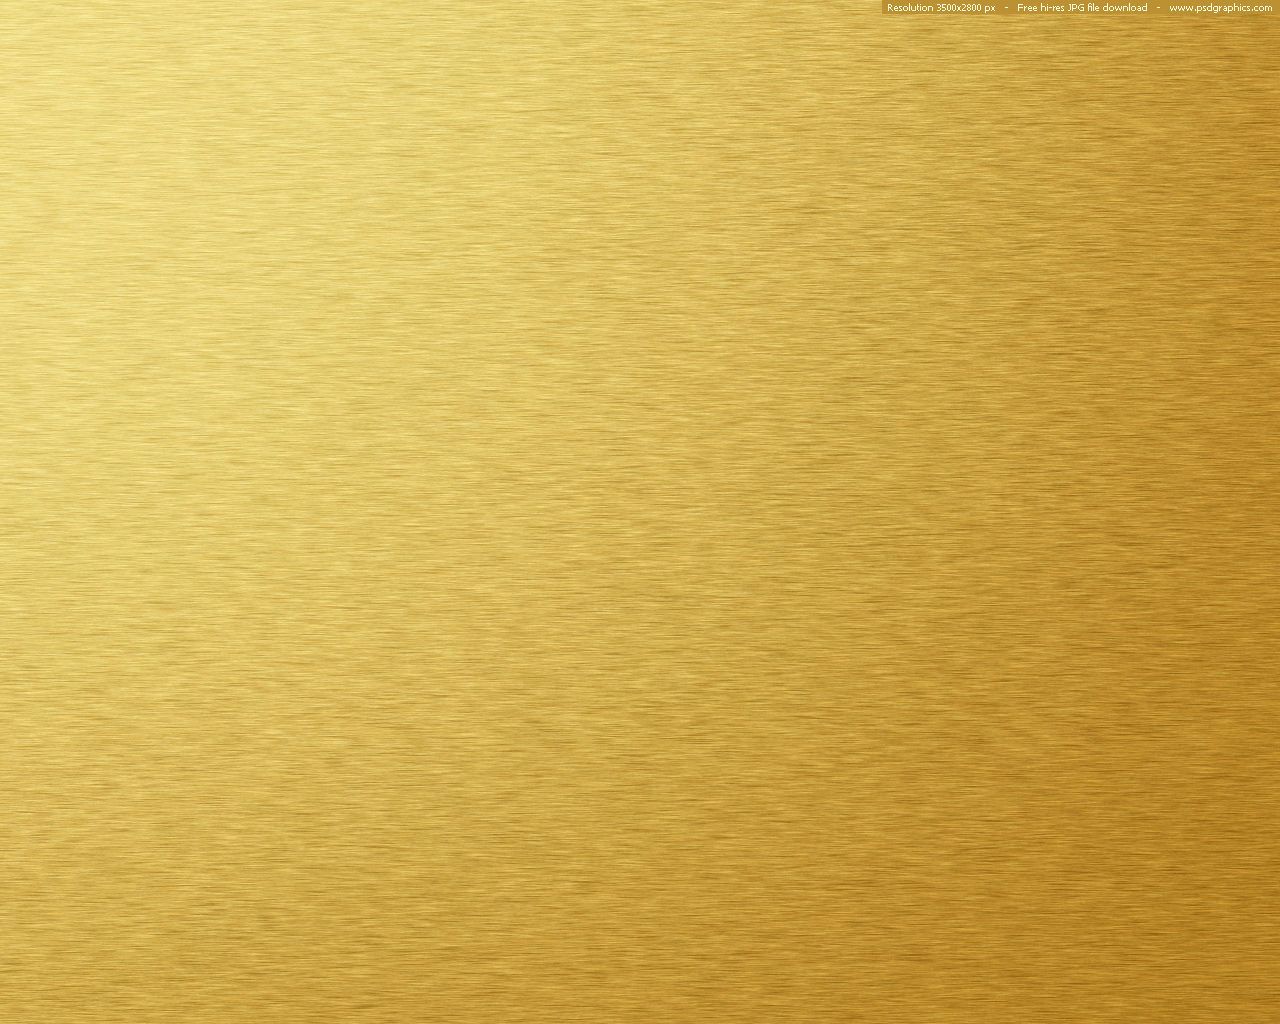 Gold Background, Wallpaper, Image, Picture. Design Trends PSD, Vector Downloads